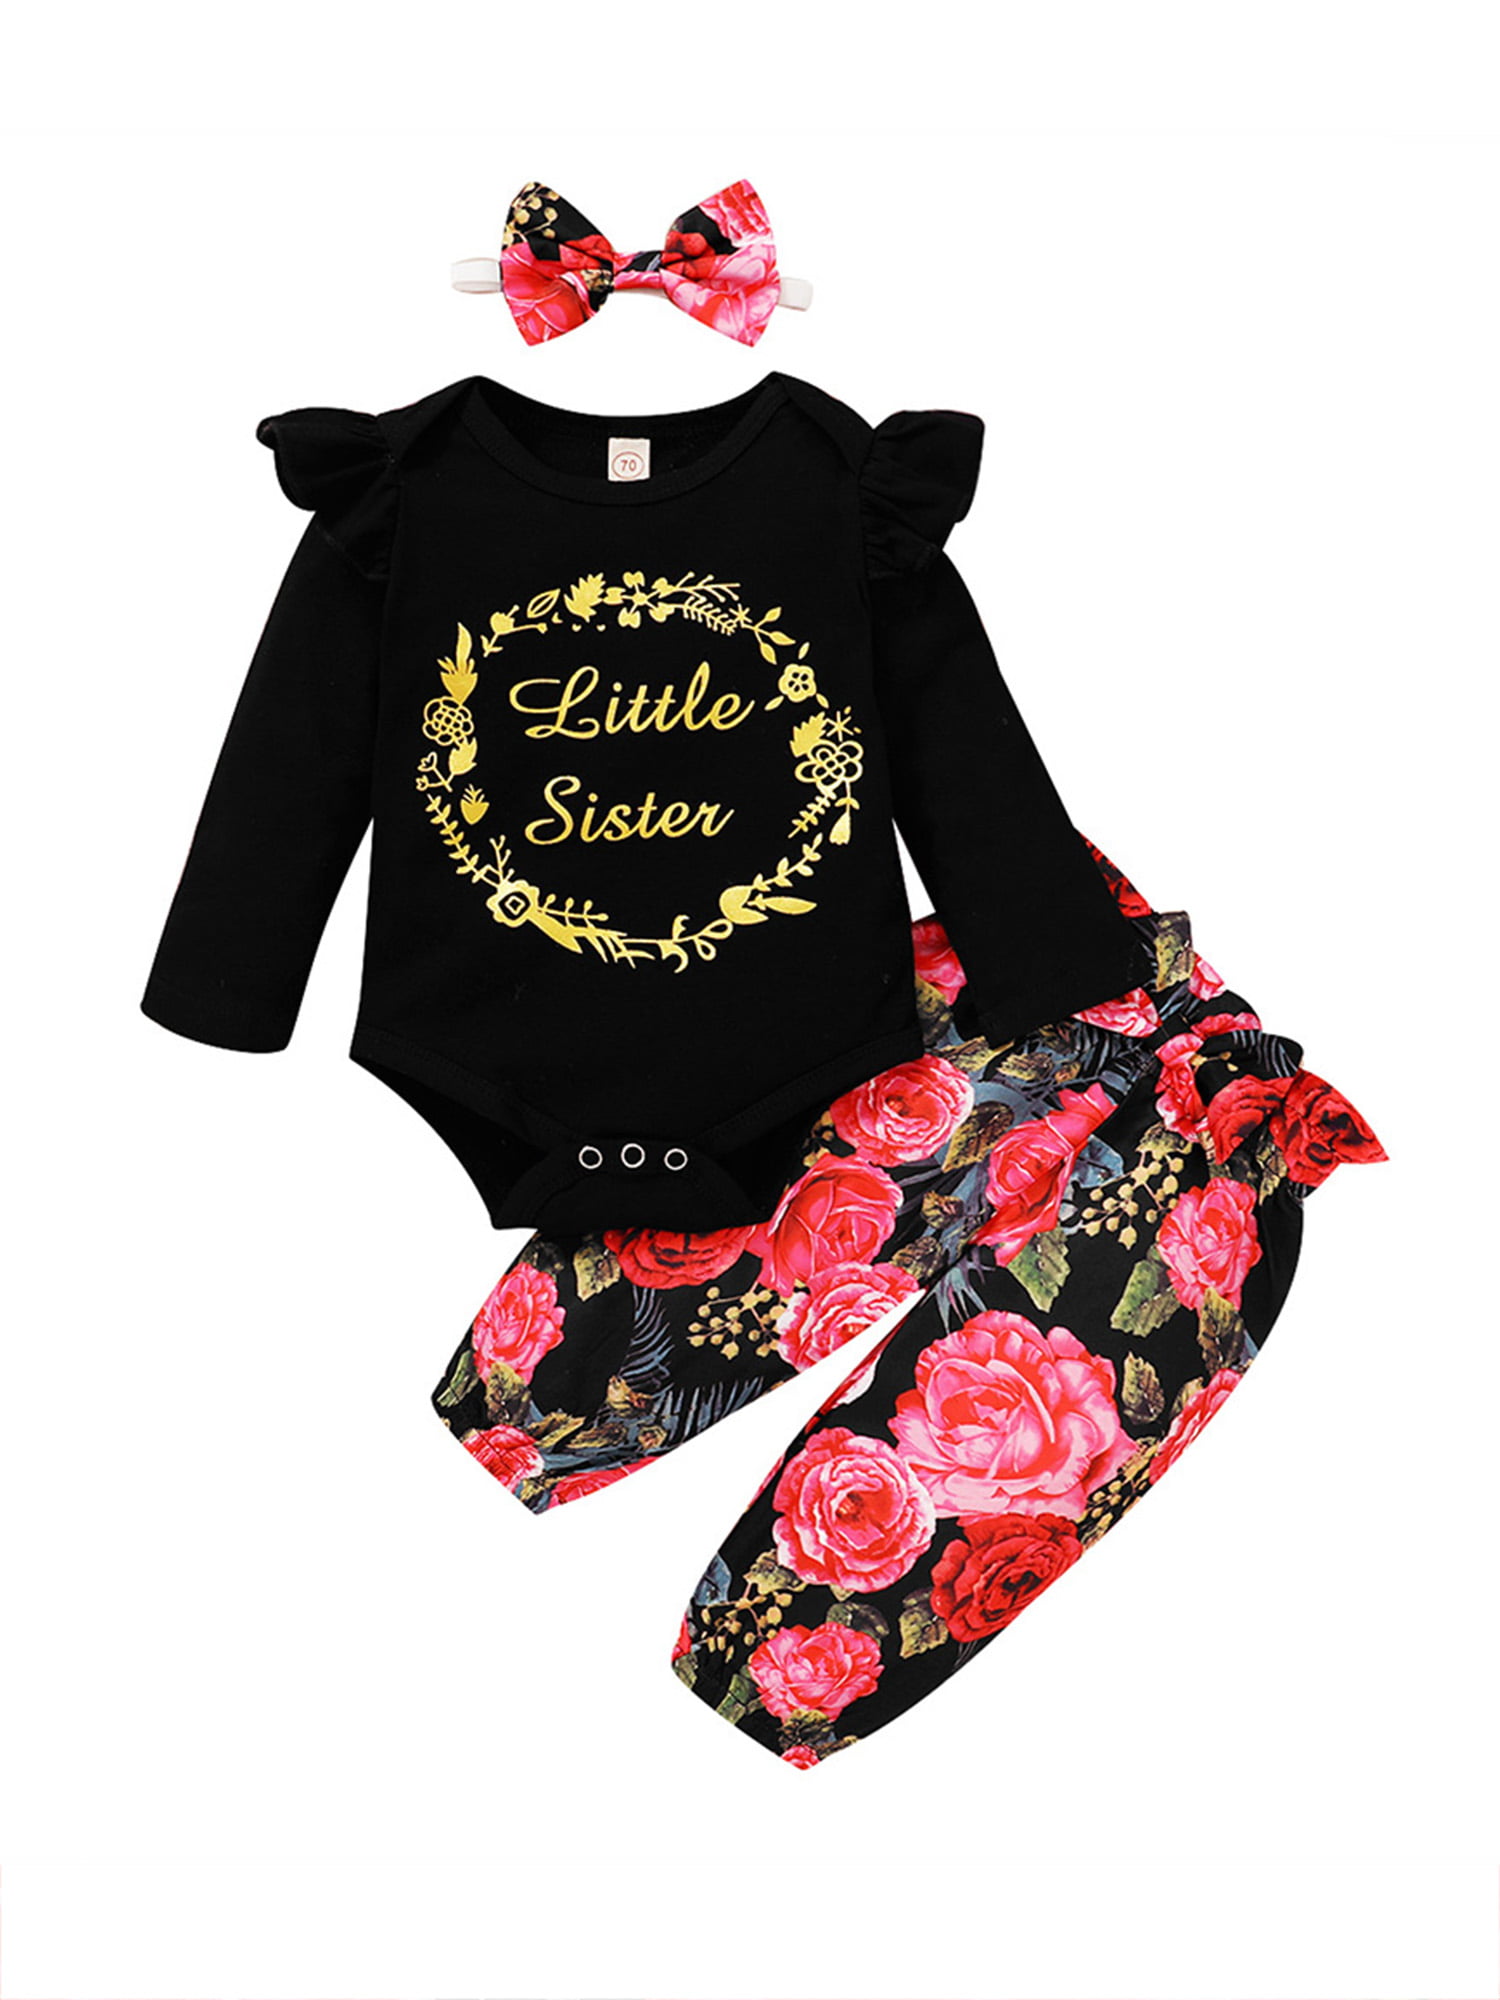 LAPA Newborn Baby Girls Clothes Floral Print Long Sleeve Romper Jumpsuit Outfits 